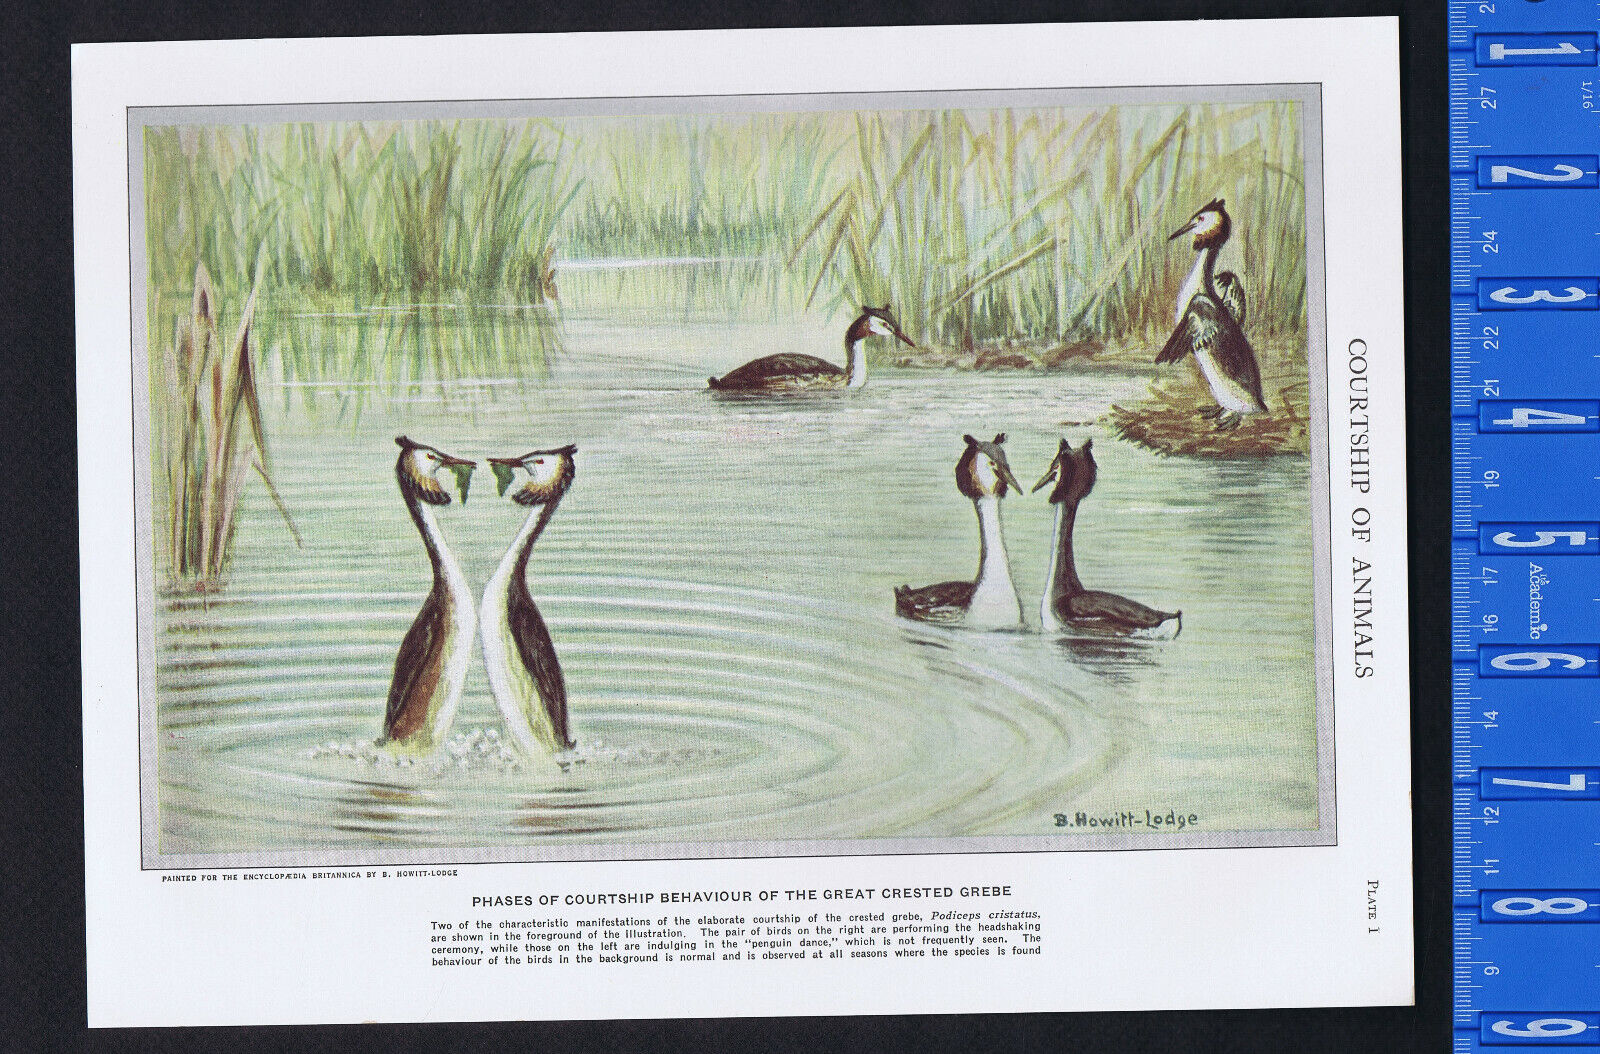 Animal Courtship Behavior - Great Crested Grebes Courting - 1950s Print 